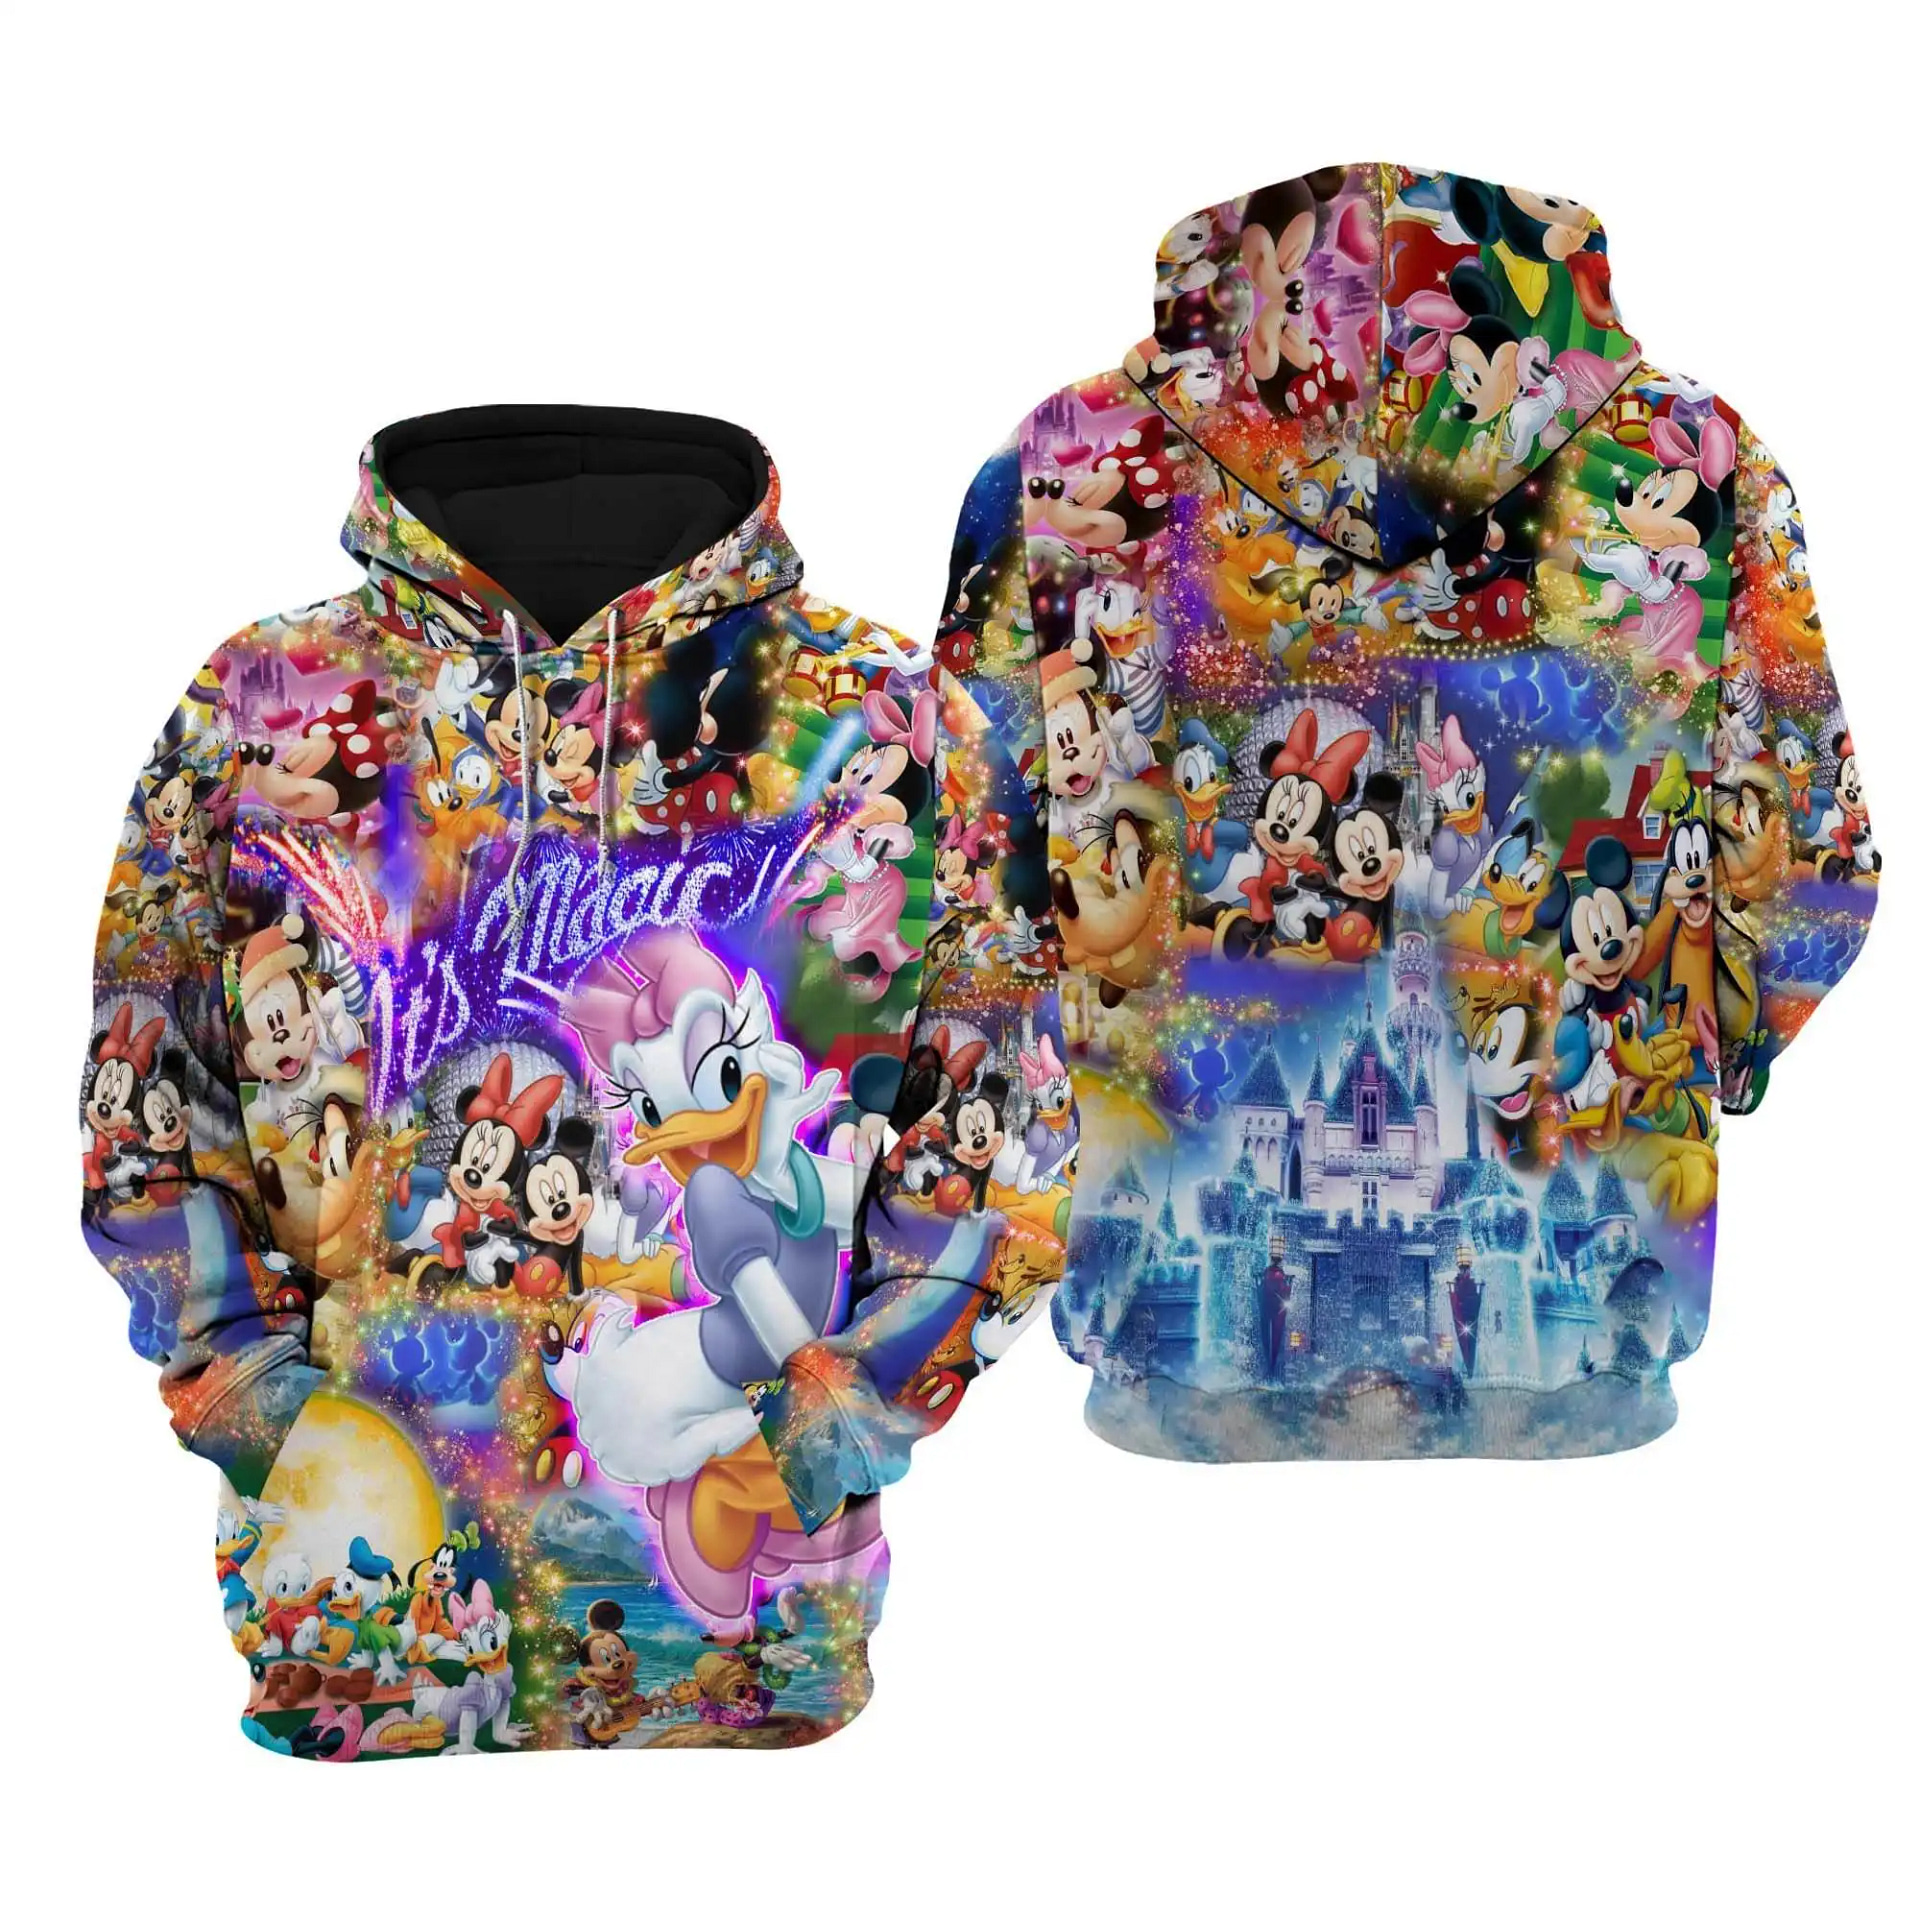 Daisy Duck Magical Glitter Castle Disney Cartoon Graphic Outfits Clothing Men Women Kids Toddlers Hoodie 3D